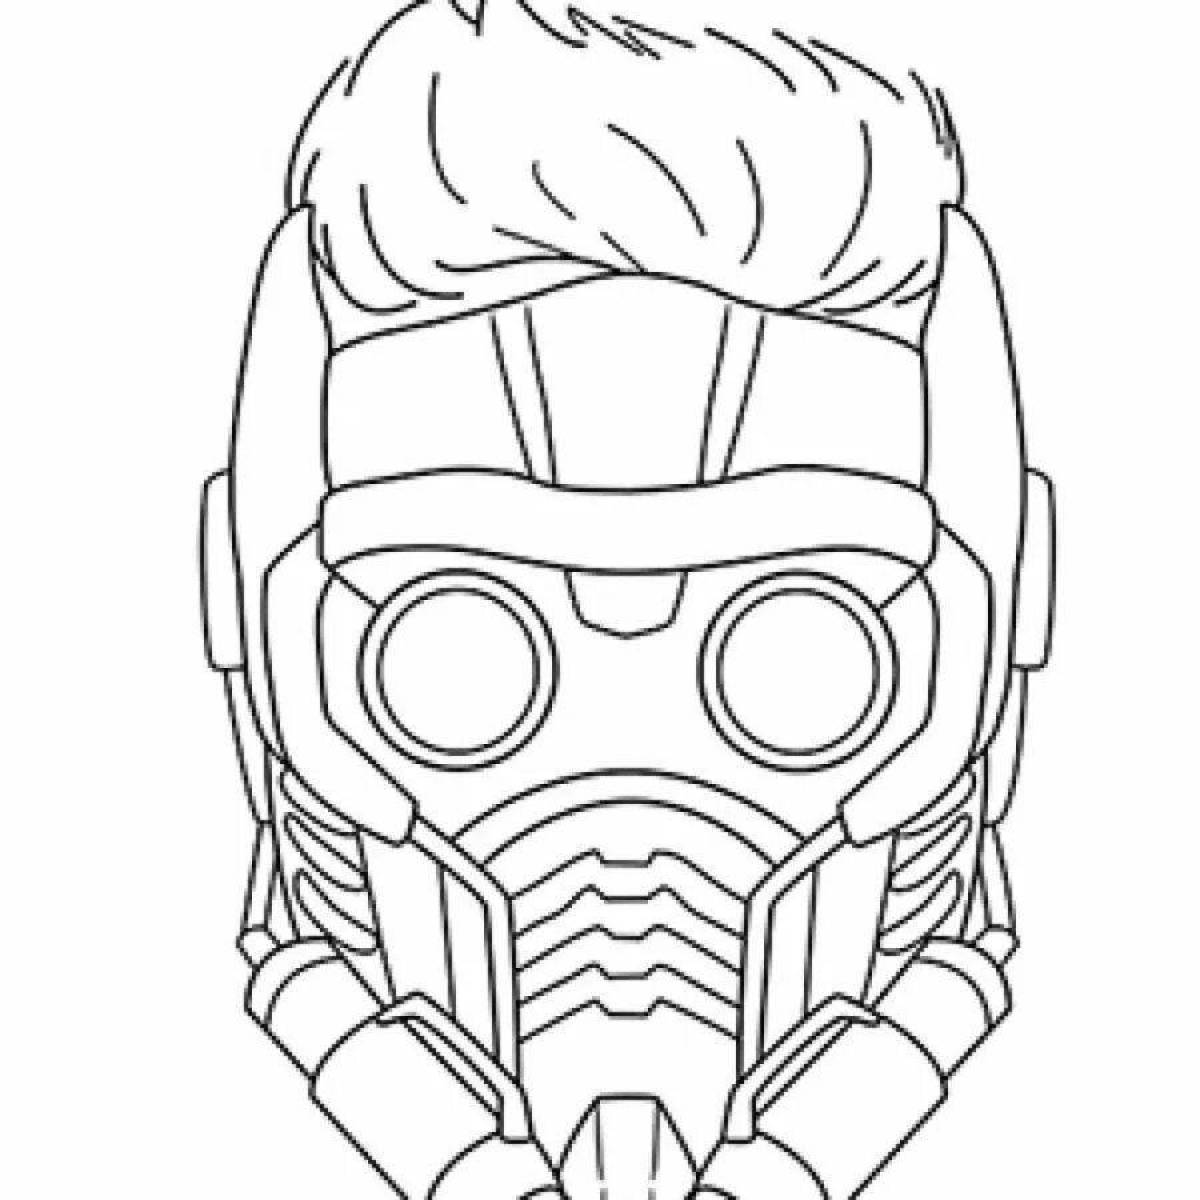 Glorious star lord coloring page